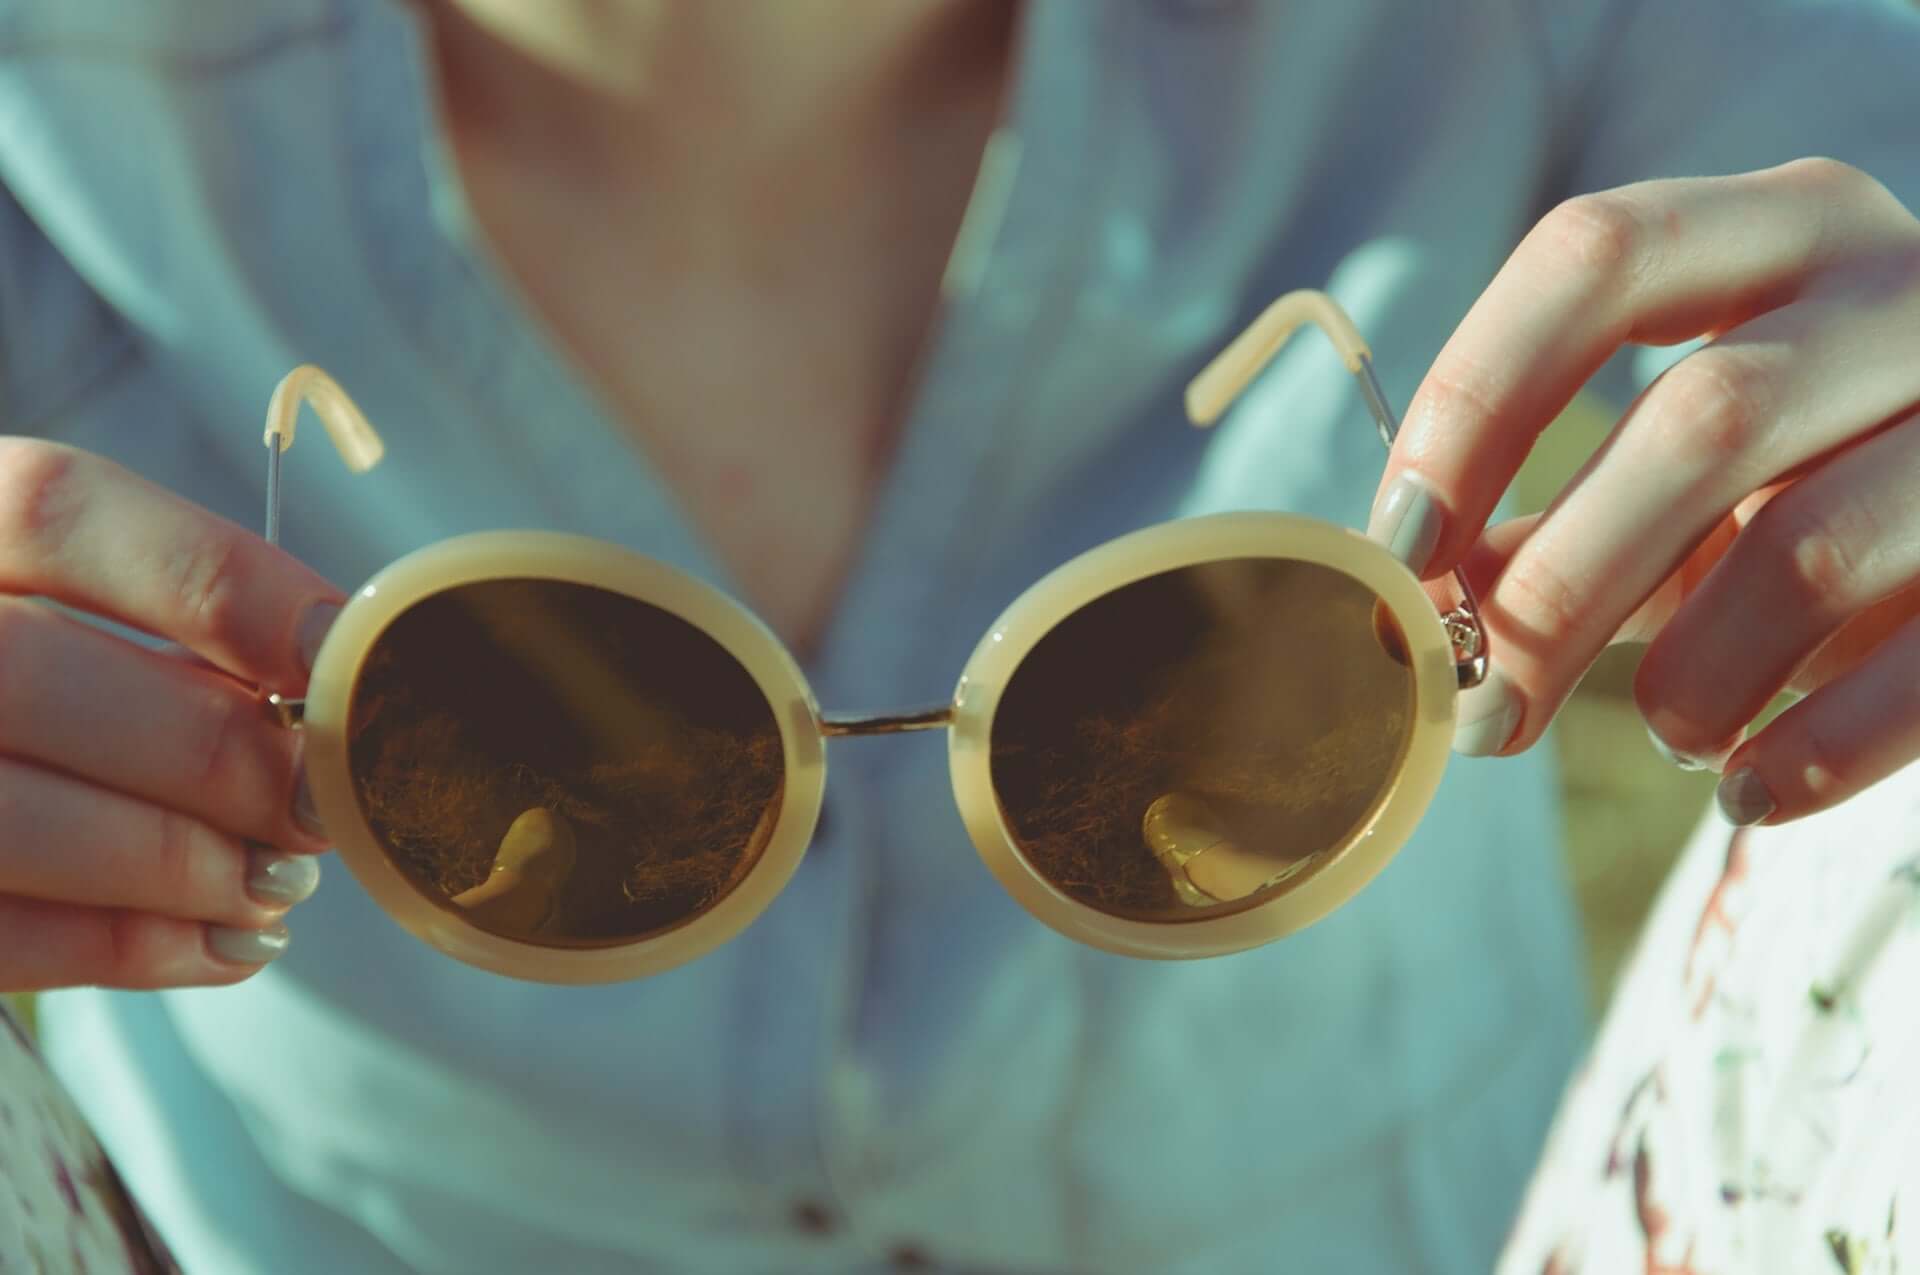 A woman in a blue button down top holds out round vintage sunglasses with off-white frames.